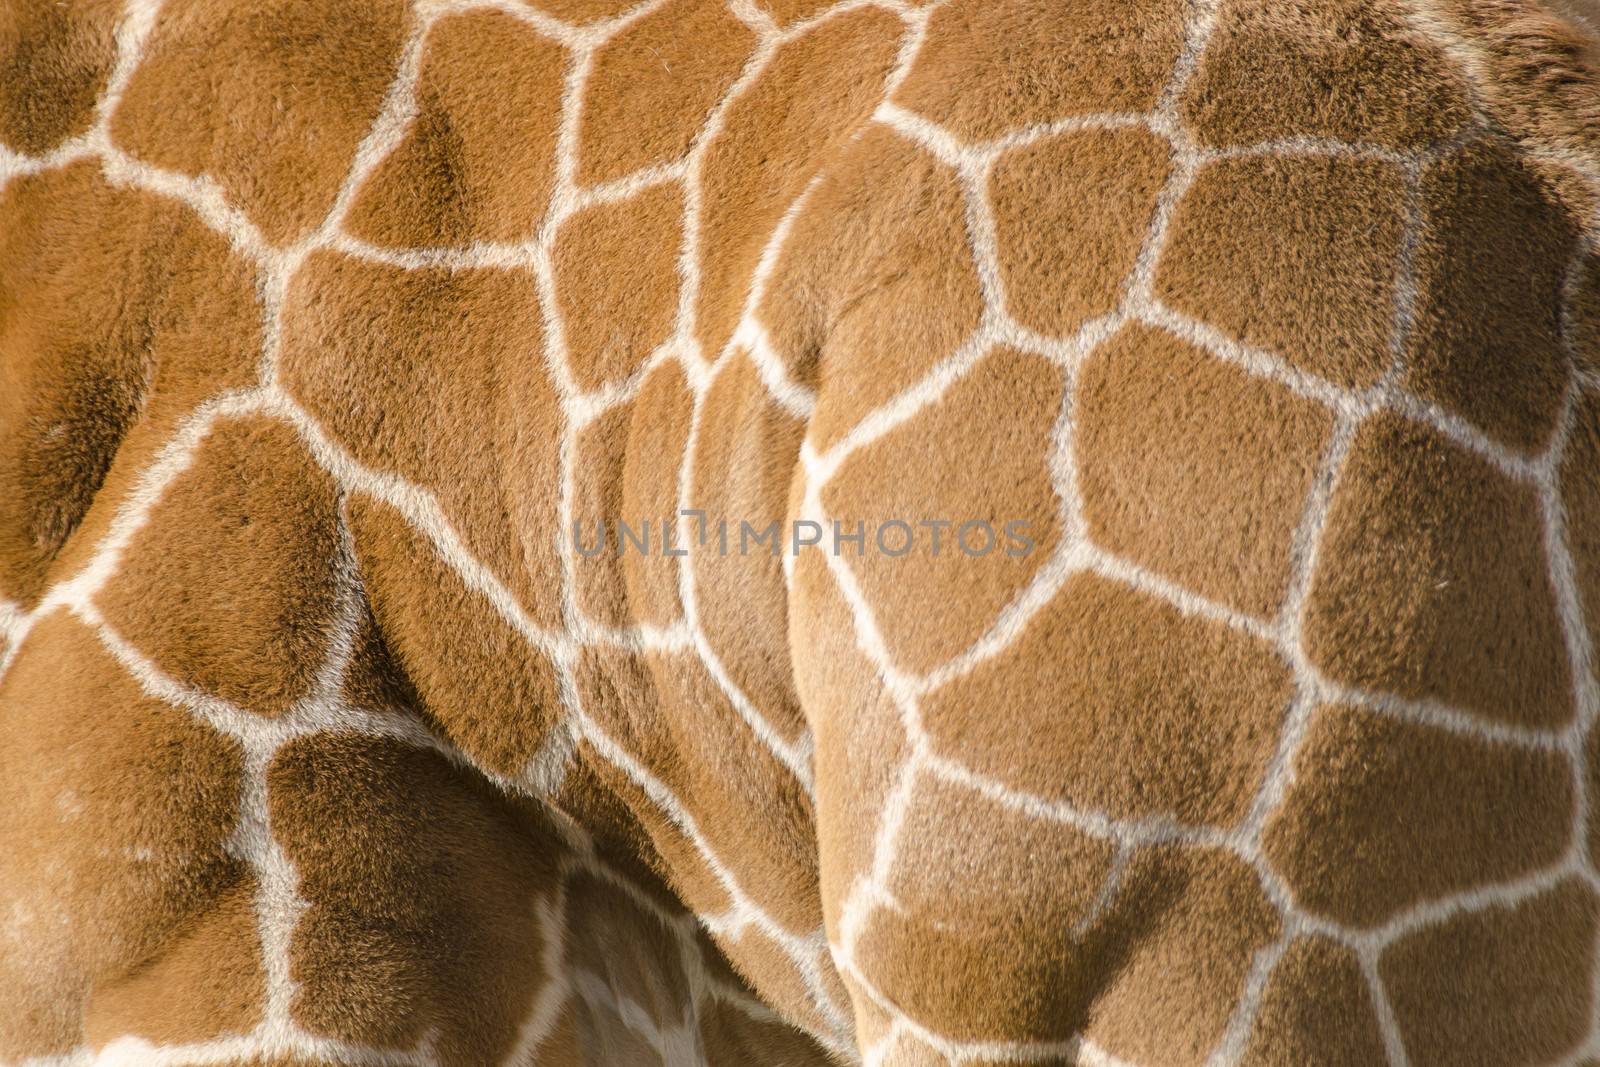 Background pattern of giraffe fur with typical pattern